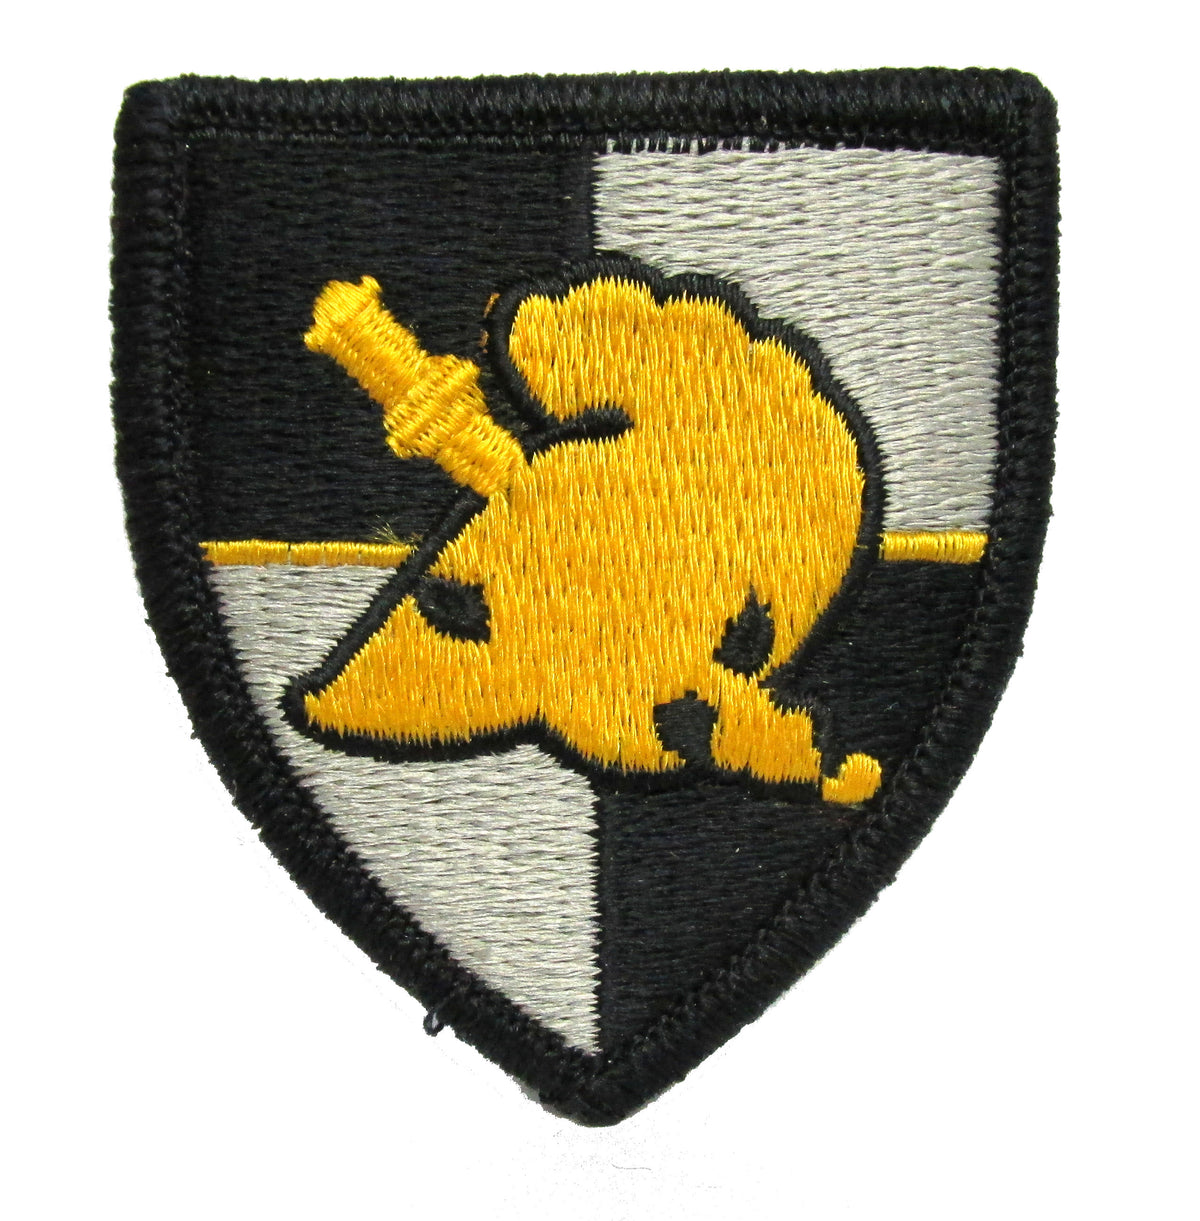 U.S. Military Academy Cadet West Point Patch - Full Color